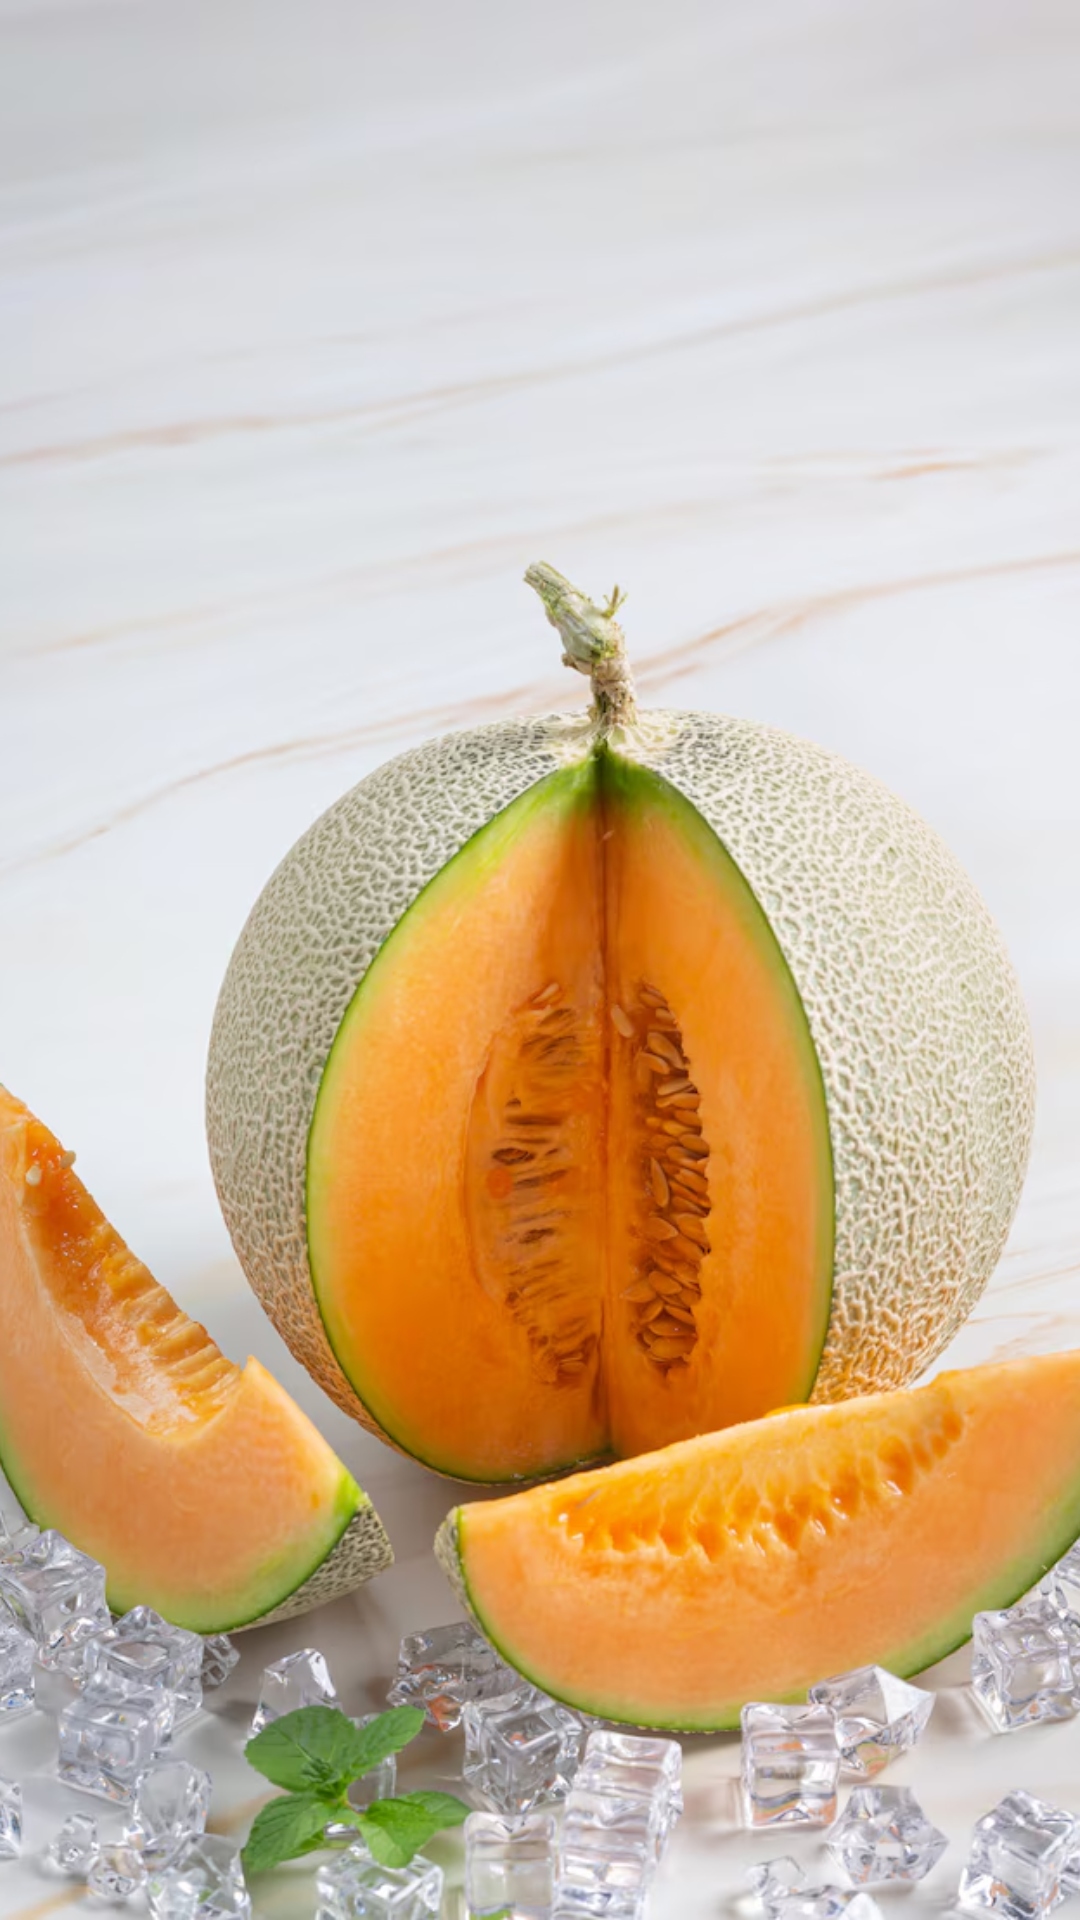 5 ways to add Muskmelon to your diet